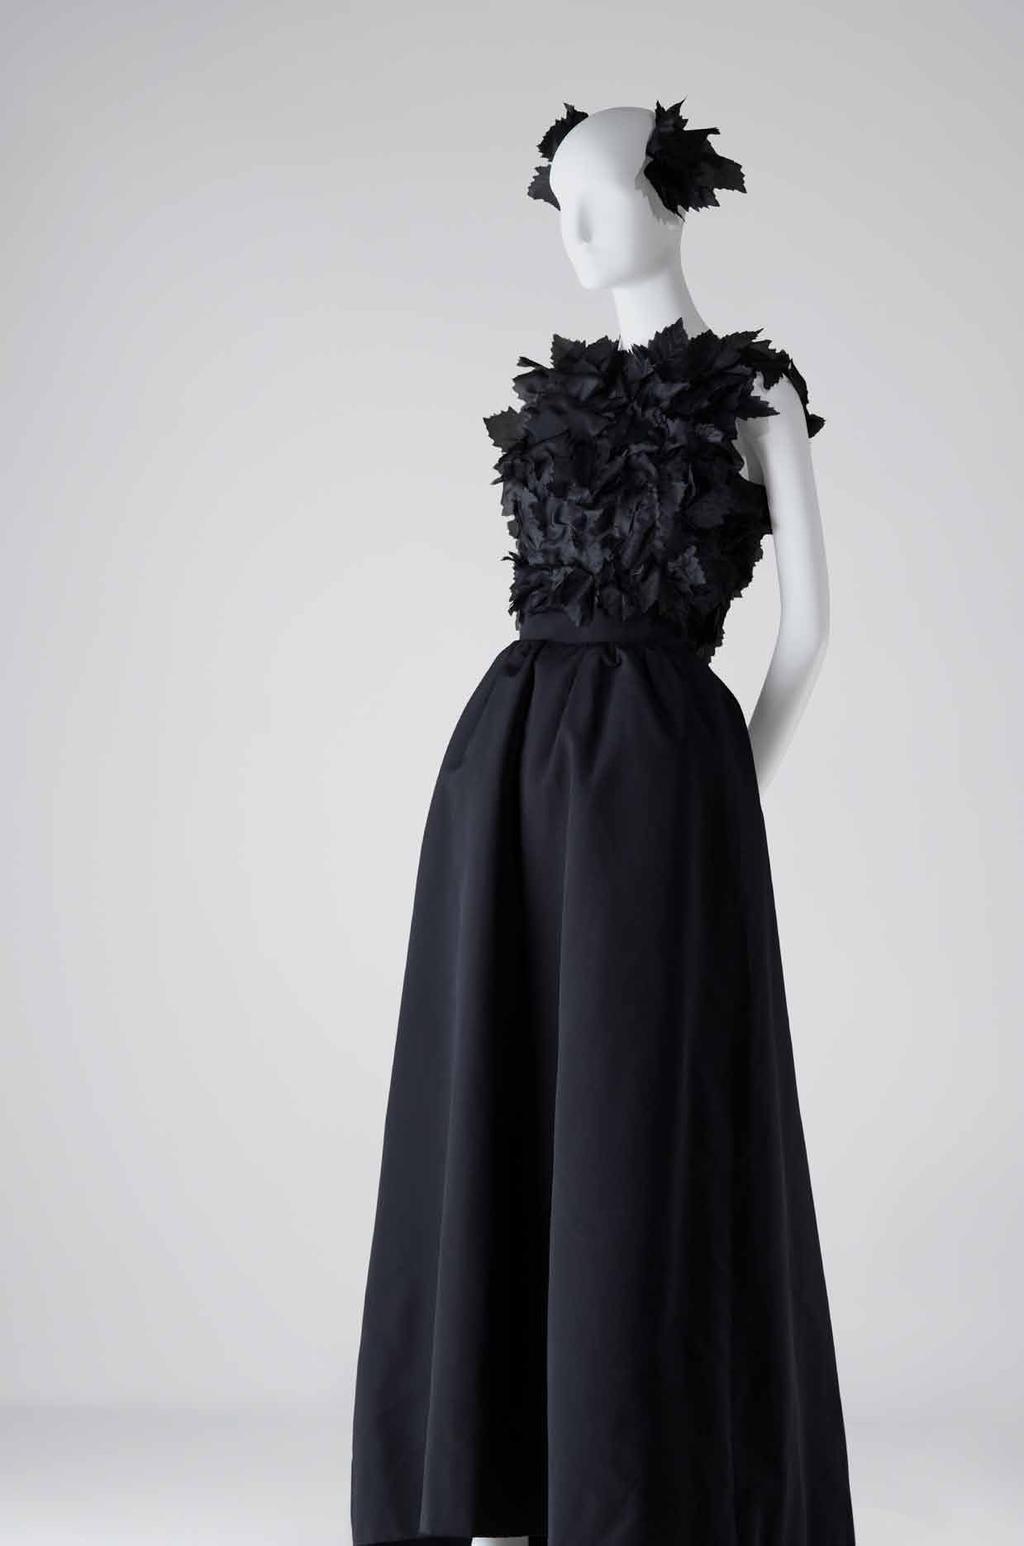 Mrs. Mellon and her World Evening outfit composed of a fitted bodice decorated with black silk organza vine leaves and a skirt in black faille. balenciaga. paris. February 1968. cbm 2014. 245ac.